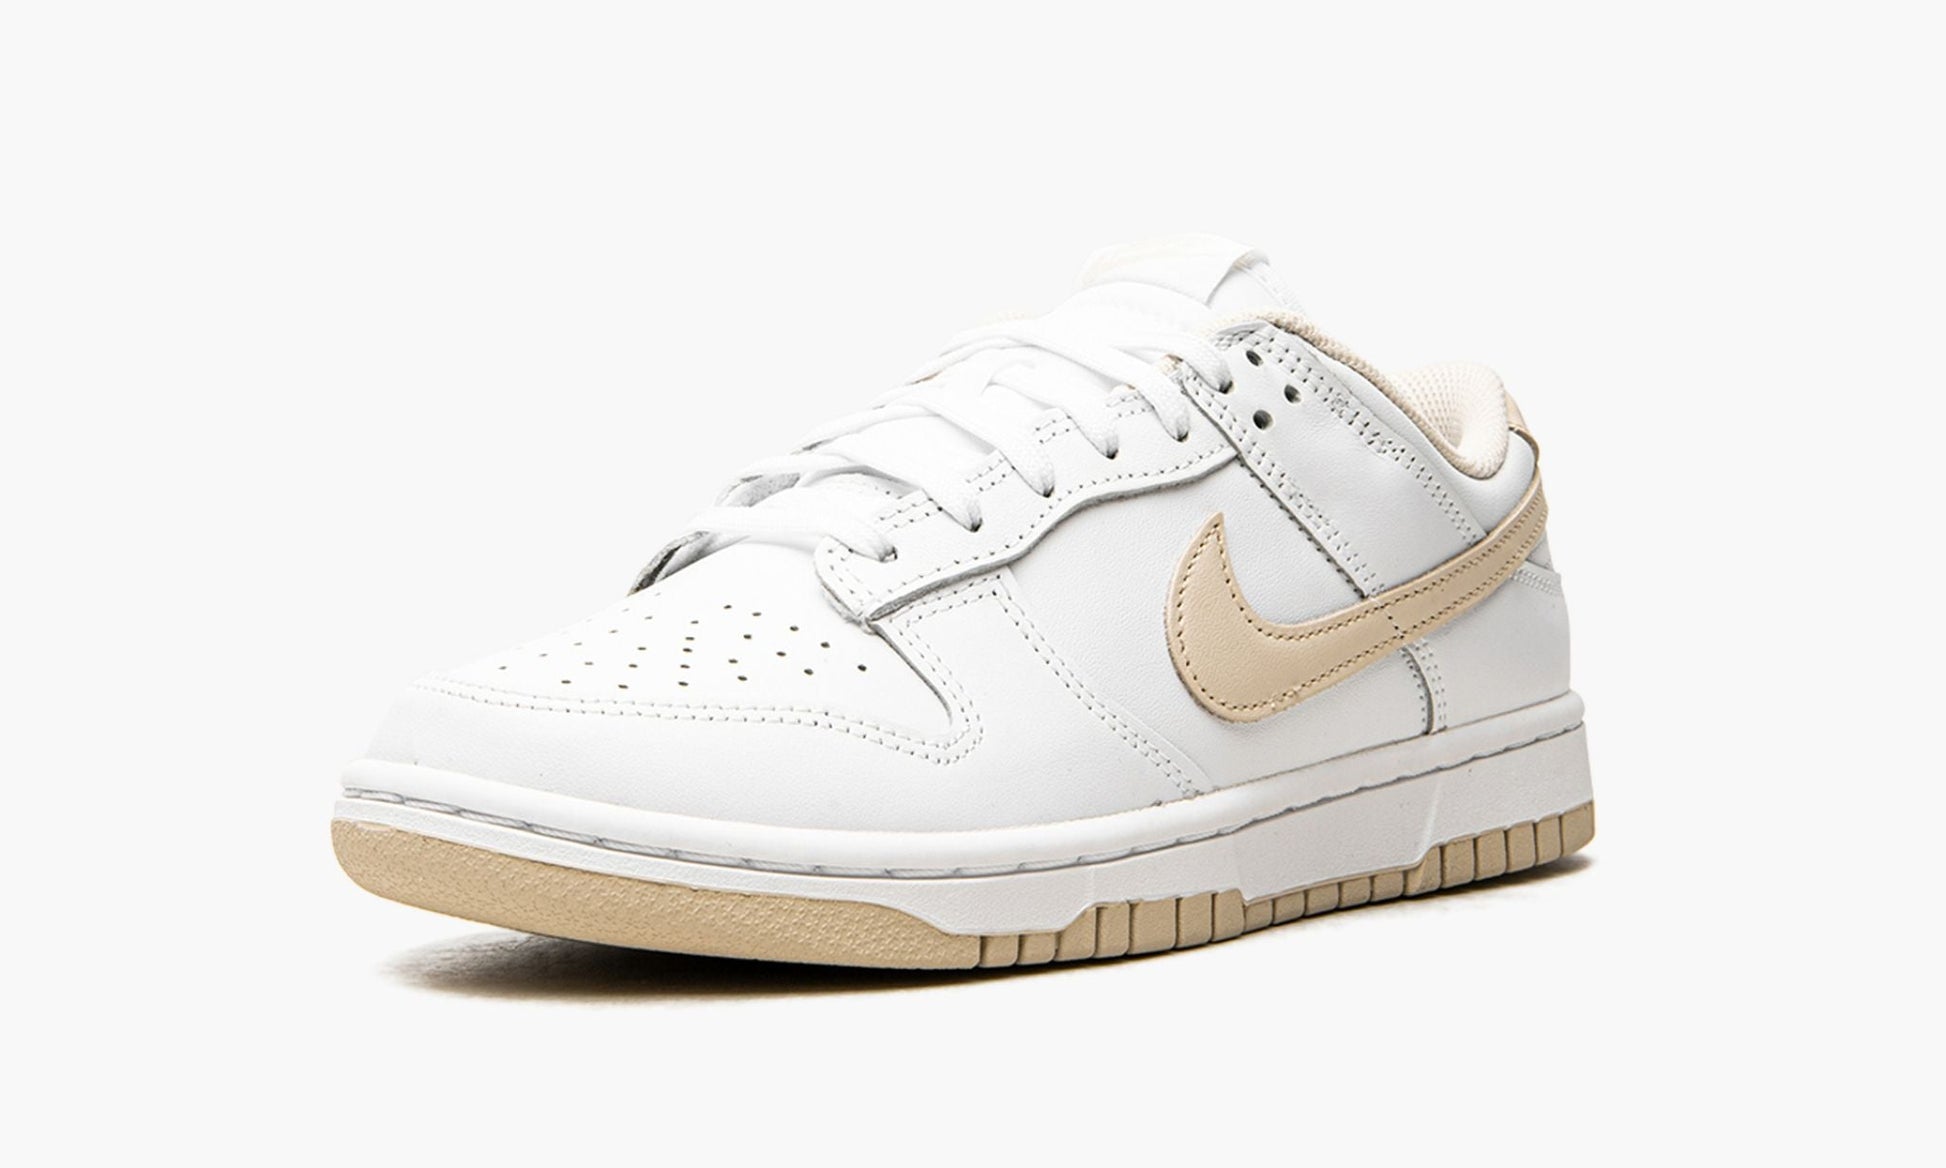 WMNS Dunk Low "Pearl White"